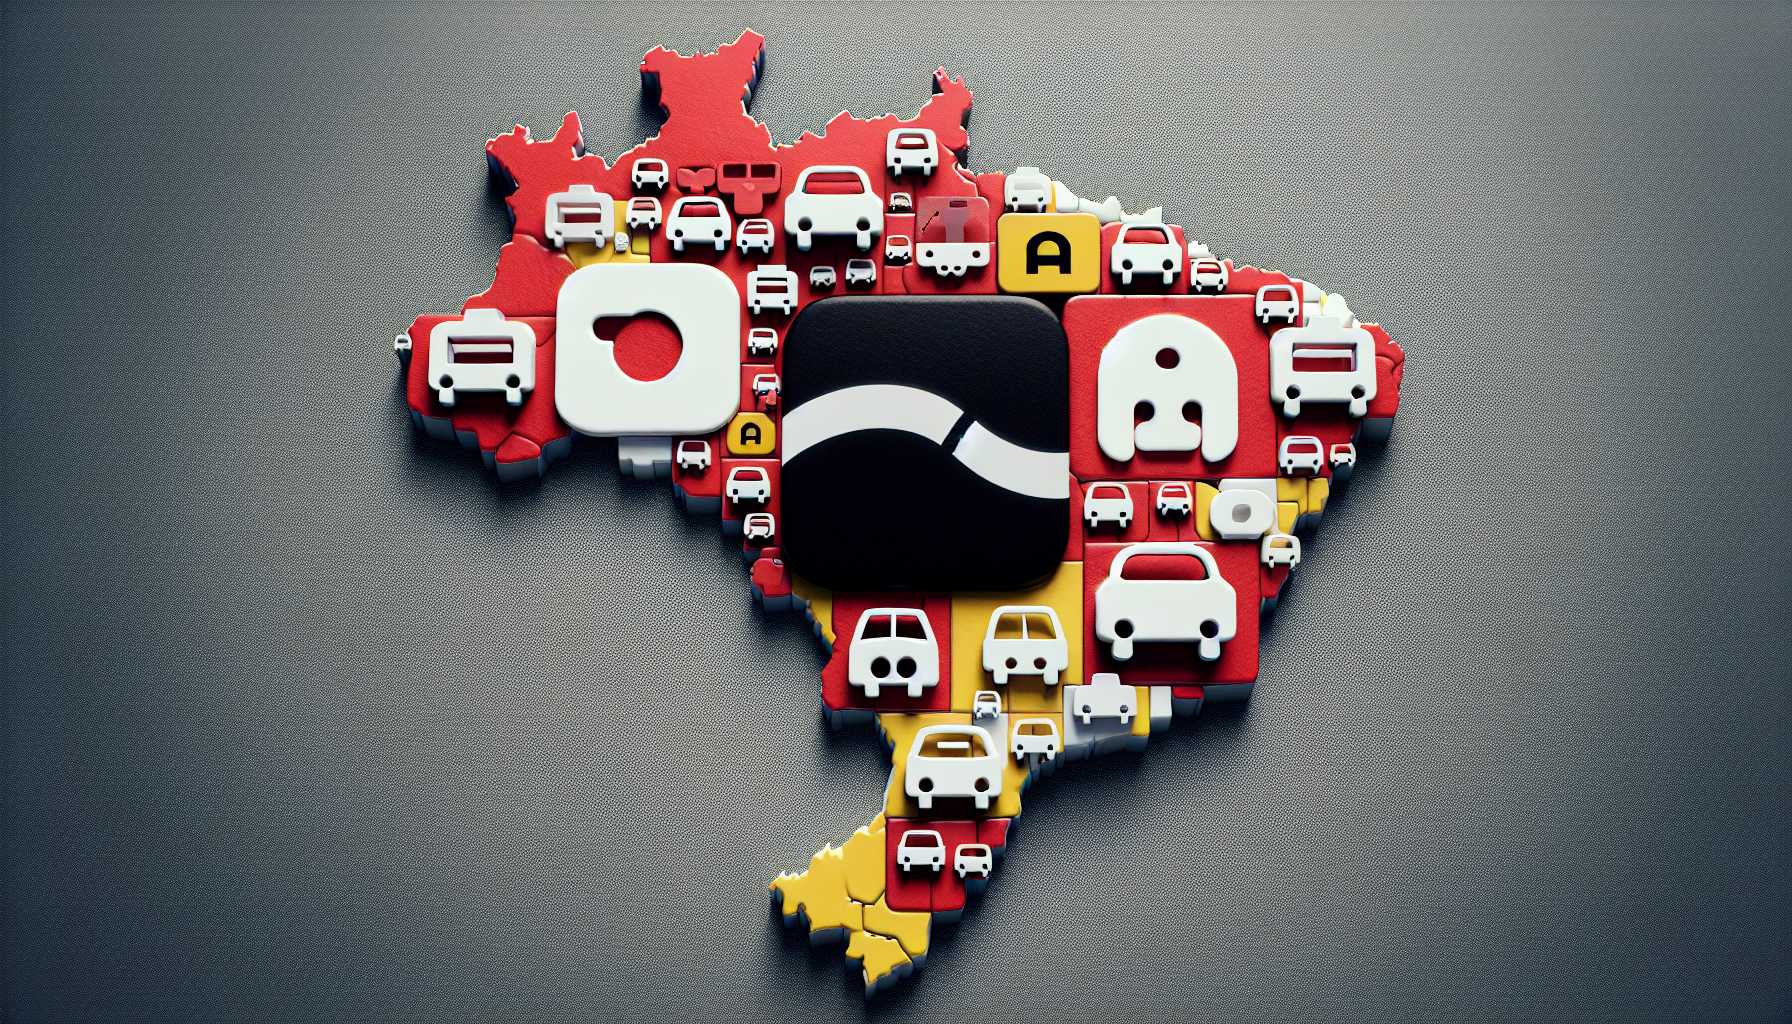 A map of Brazil with Uber and 99 logos scattered across the country